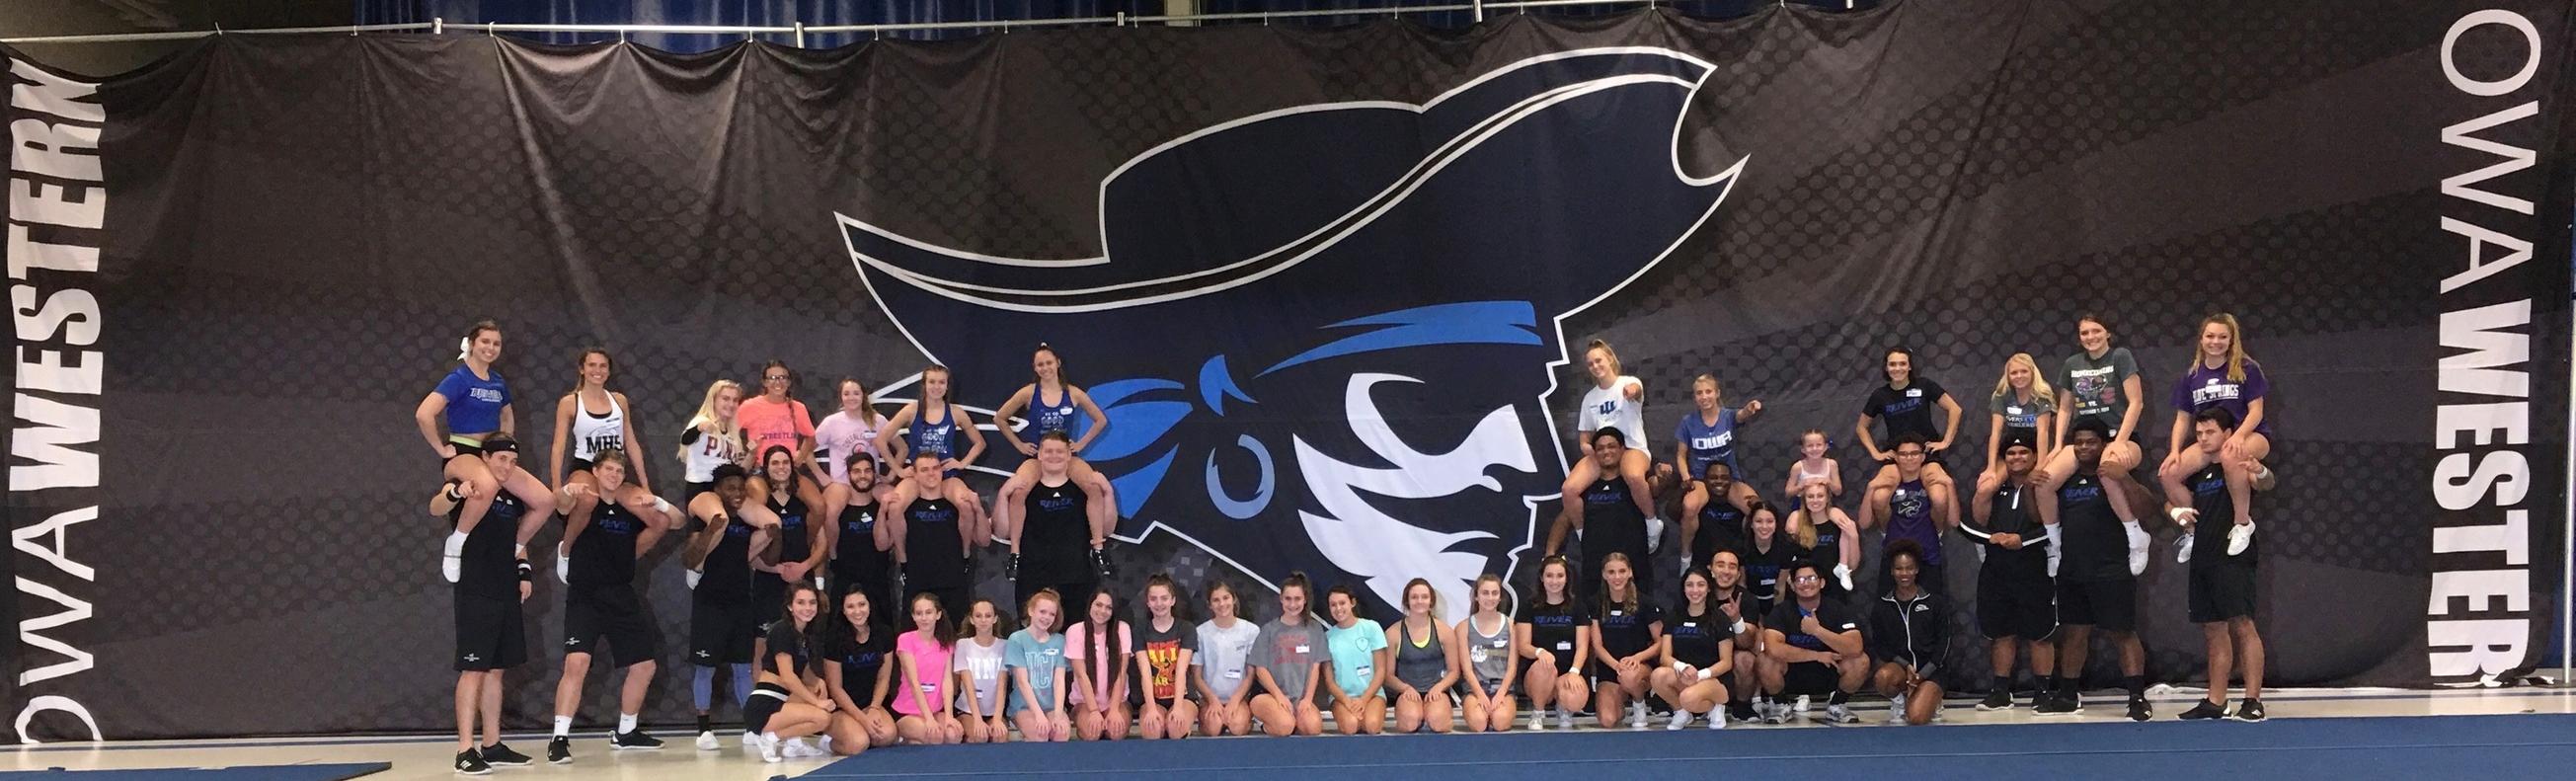 All Girl & Coed Stunt/Tumble Clinic! (March 9th, 2019)